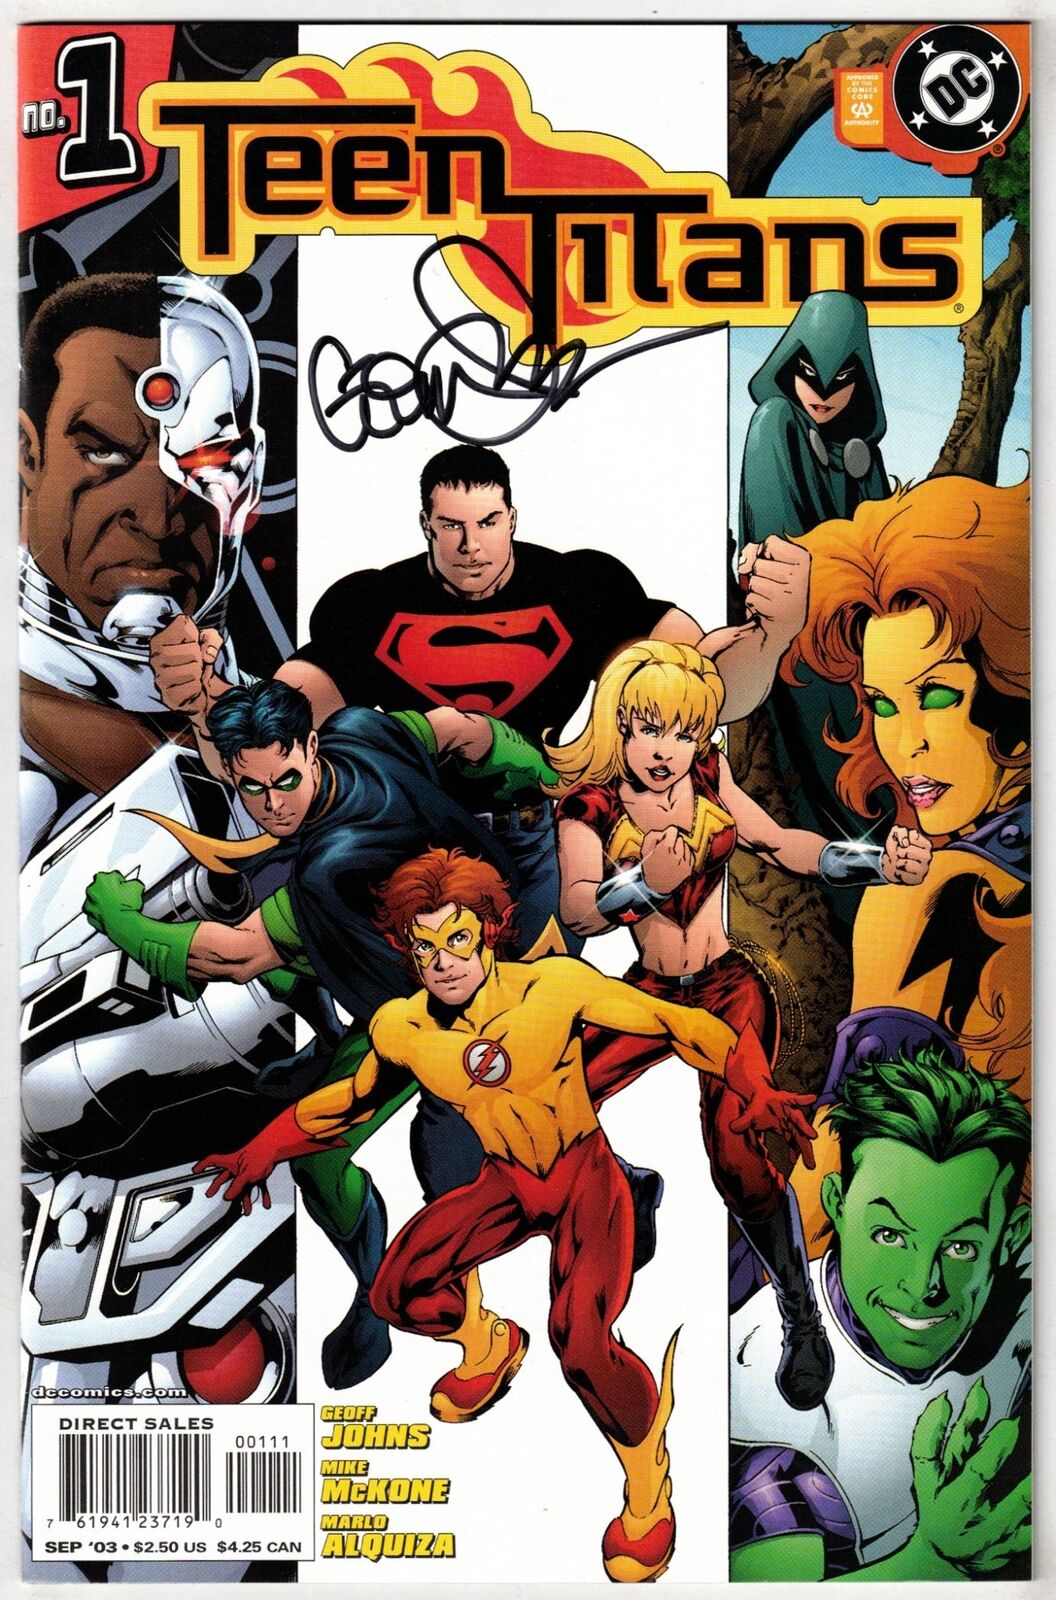 TEEN TITANS #1 (2003)- COVER A 1ST PRINT- SIGNED BY GEOFF JOHNS W/COA- VF+